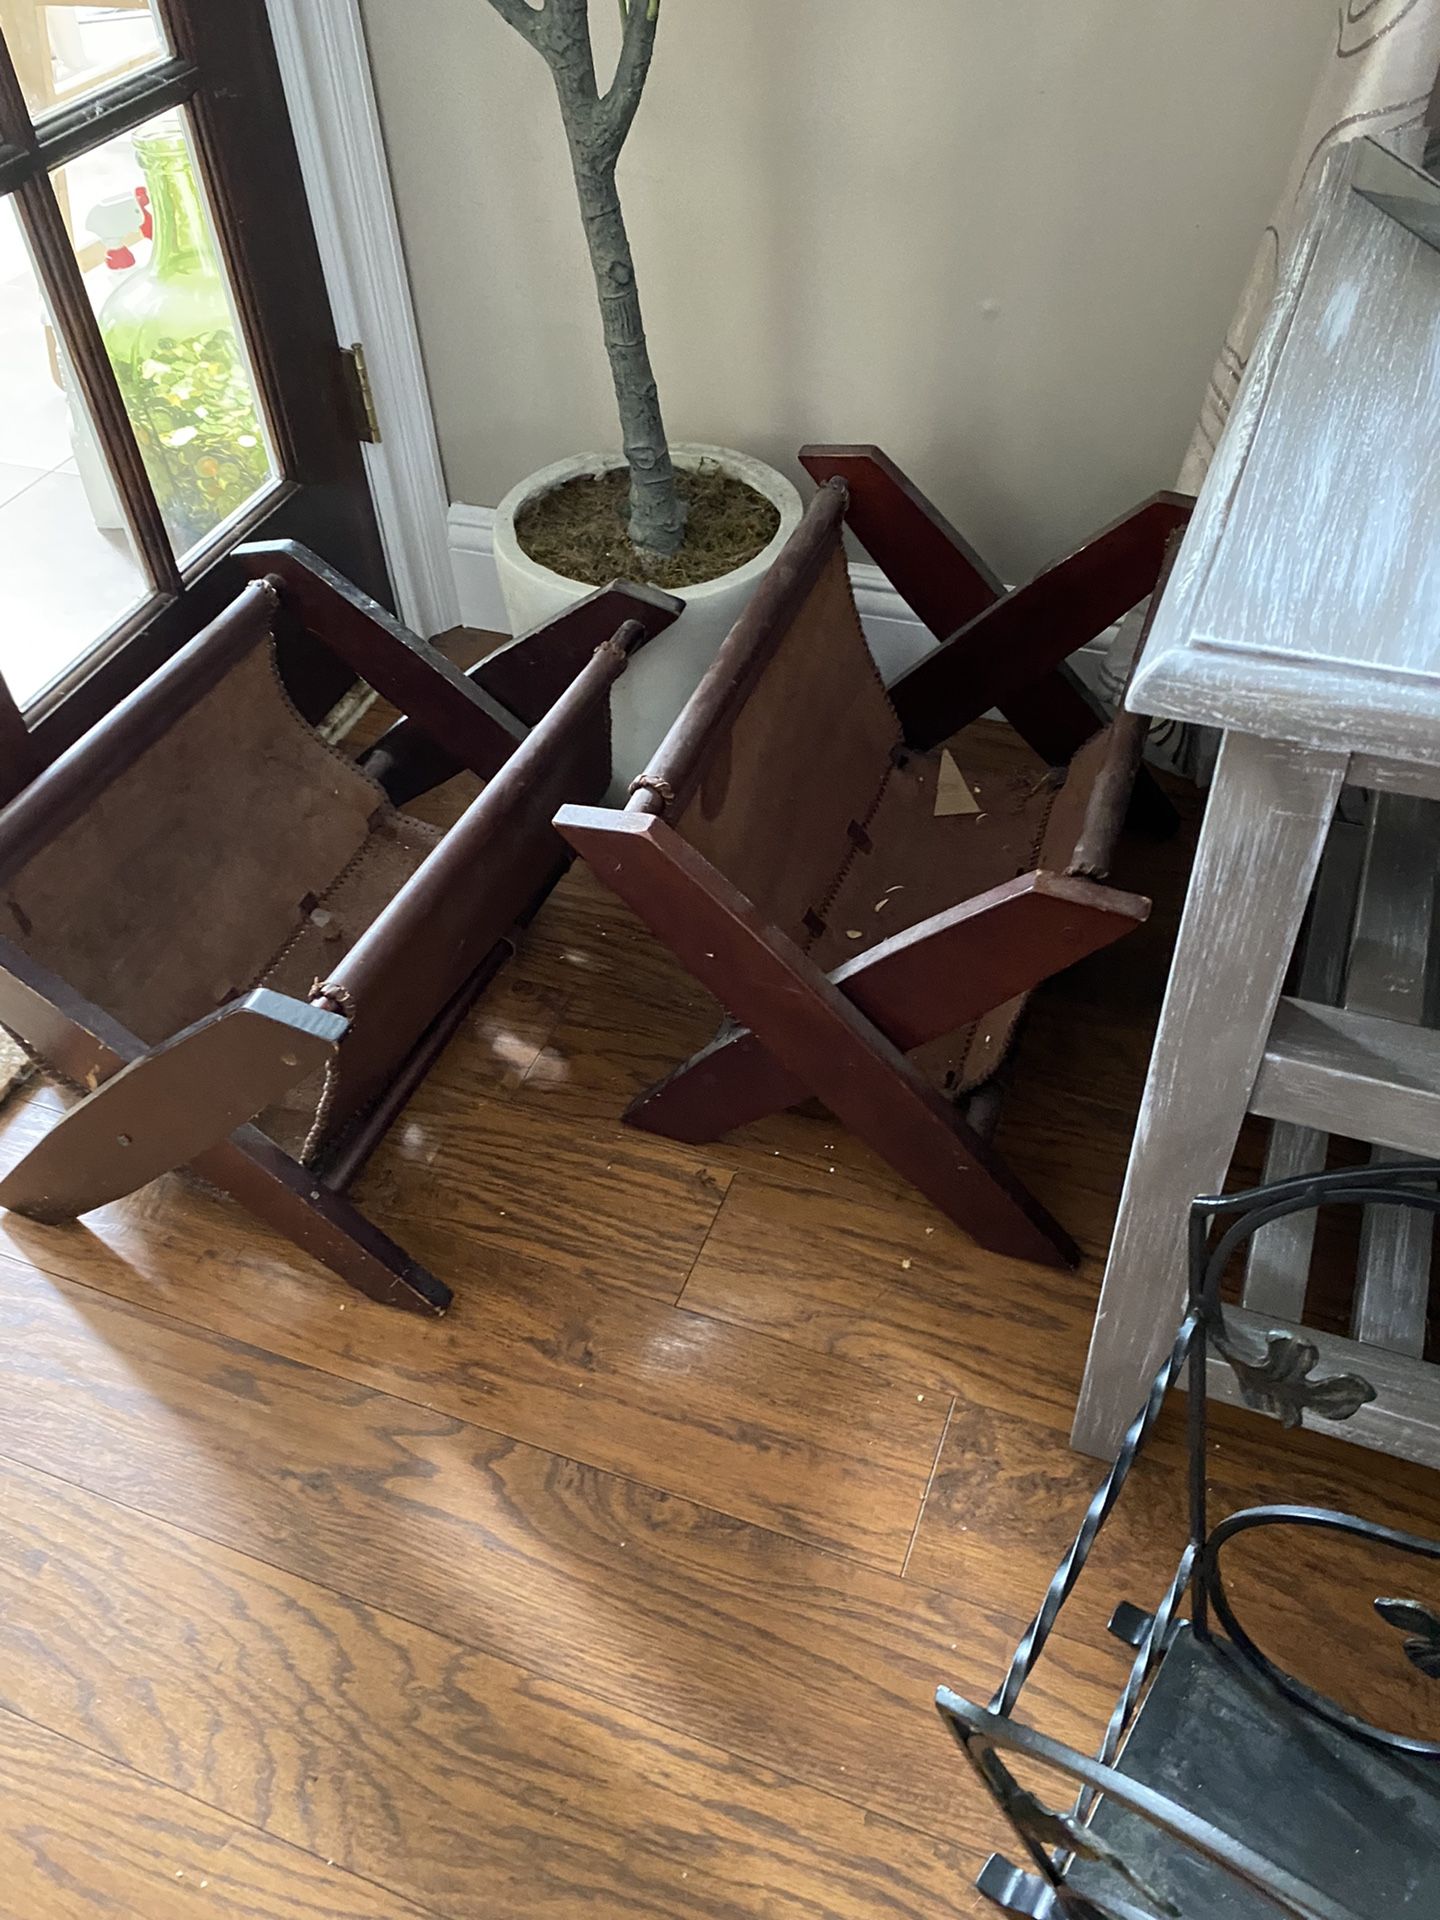 Magazine Racks Leather And Wood (2) $30 Each Buy 1 Or Both 